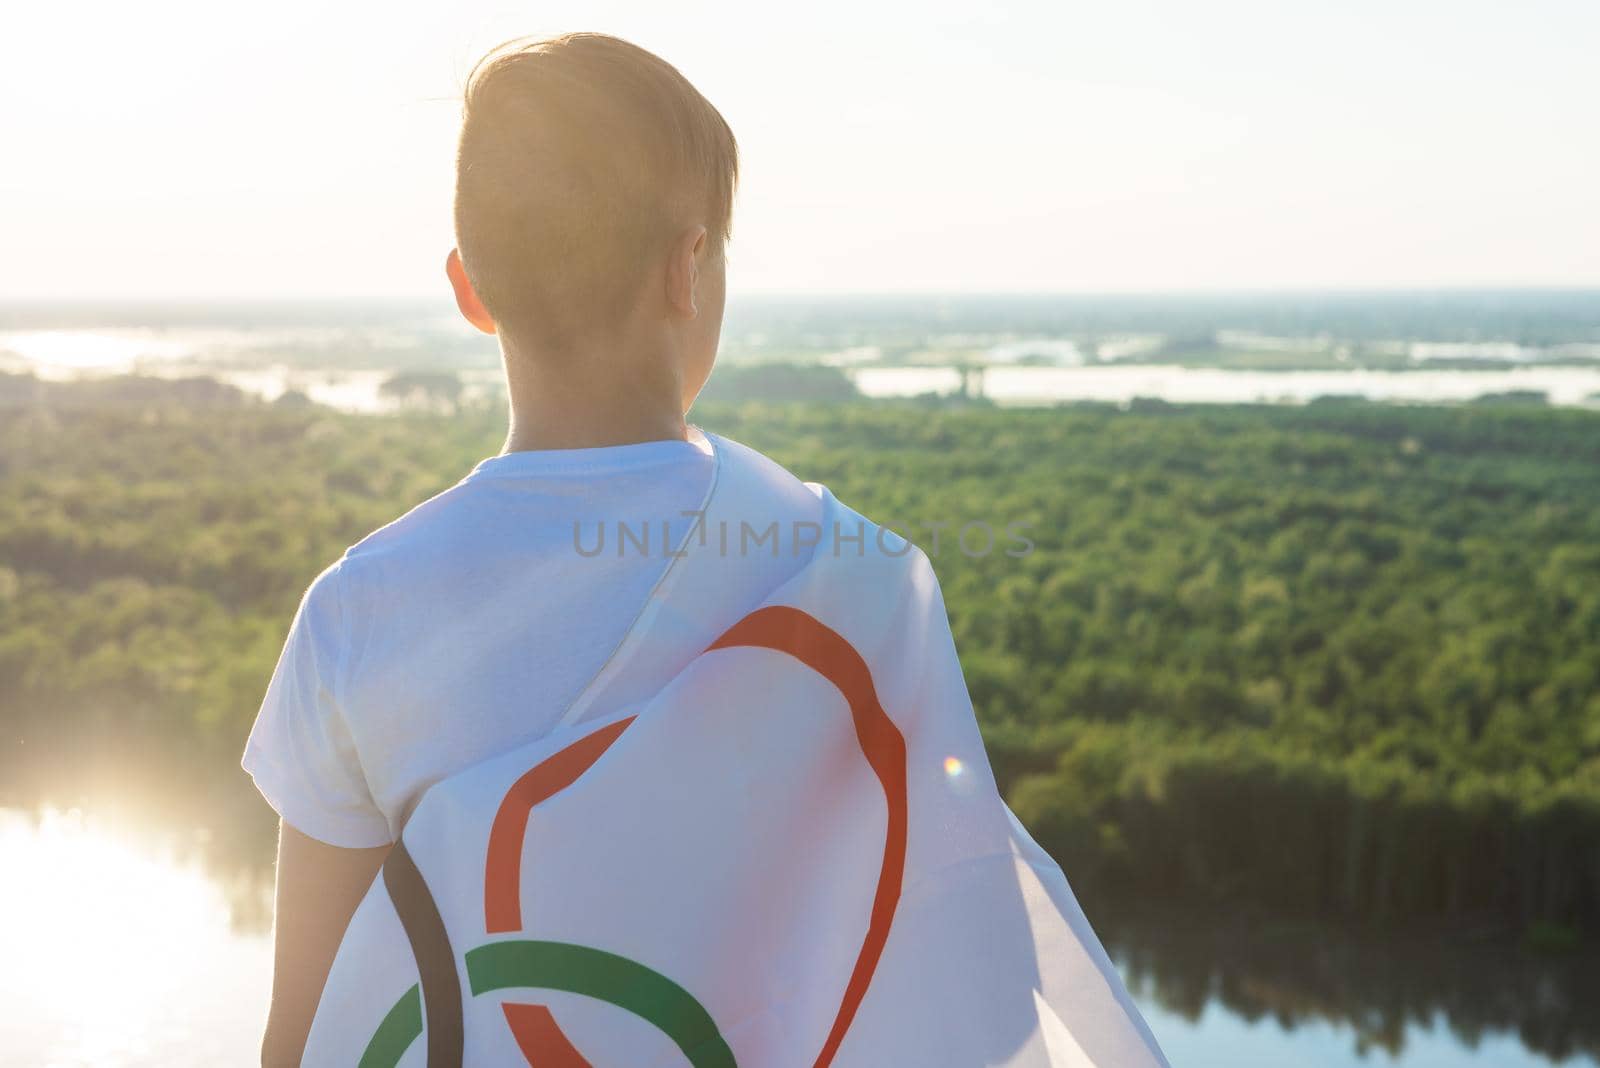 Portrait of boy waving flag the Olympic Games outdoors over cloudy sunset sky. Children sports fan. Summer olympic games concept. 08.06.2021, Barnaul Russia.